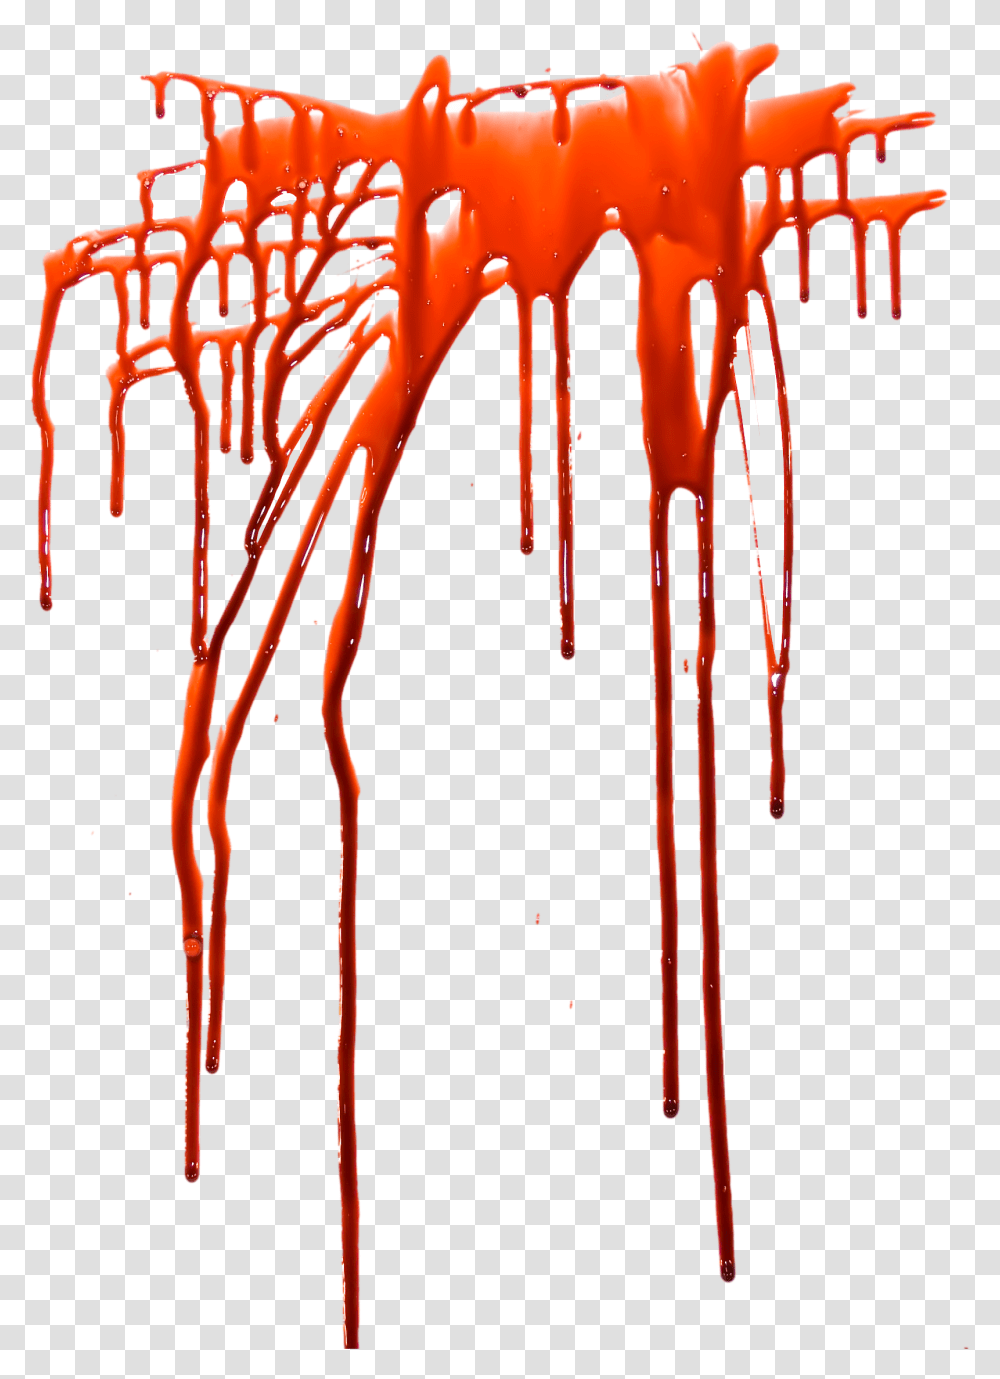 Blood Images Free Download Blood Splashes, Sea Life, Animal, Seafood, Bow Transparent Png